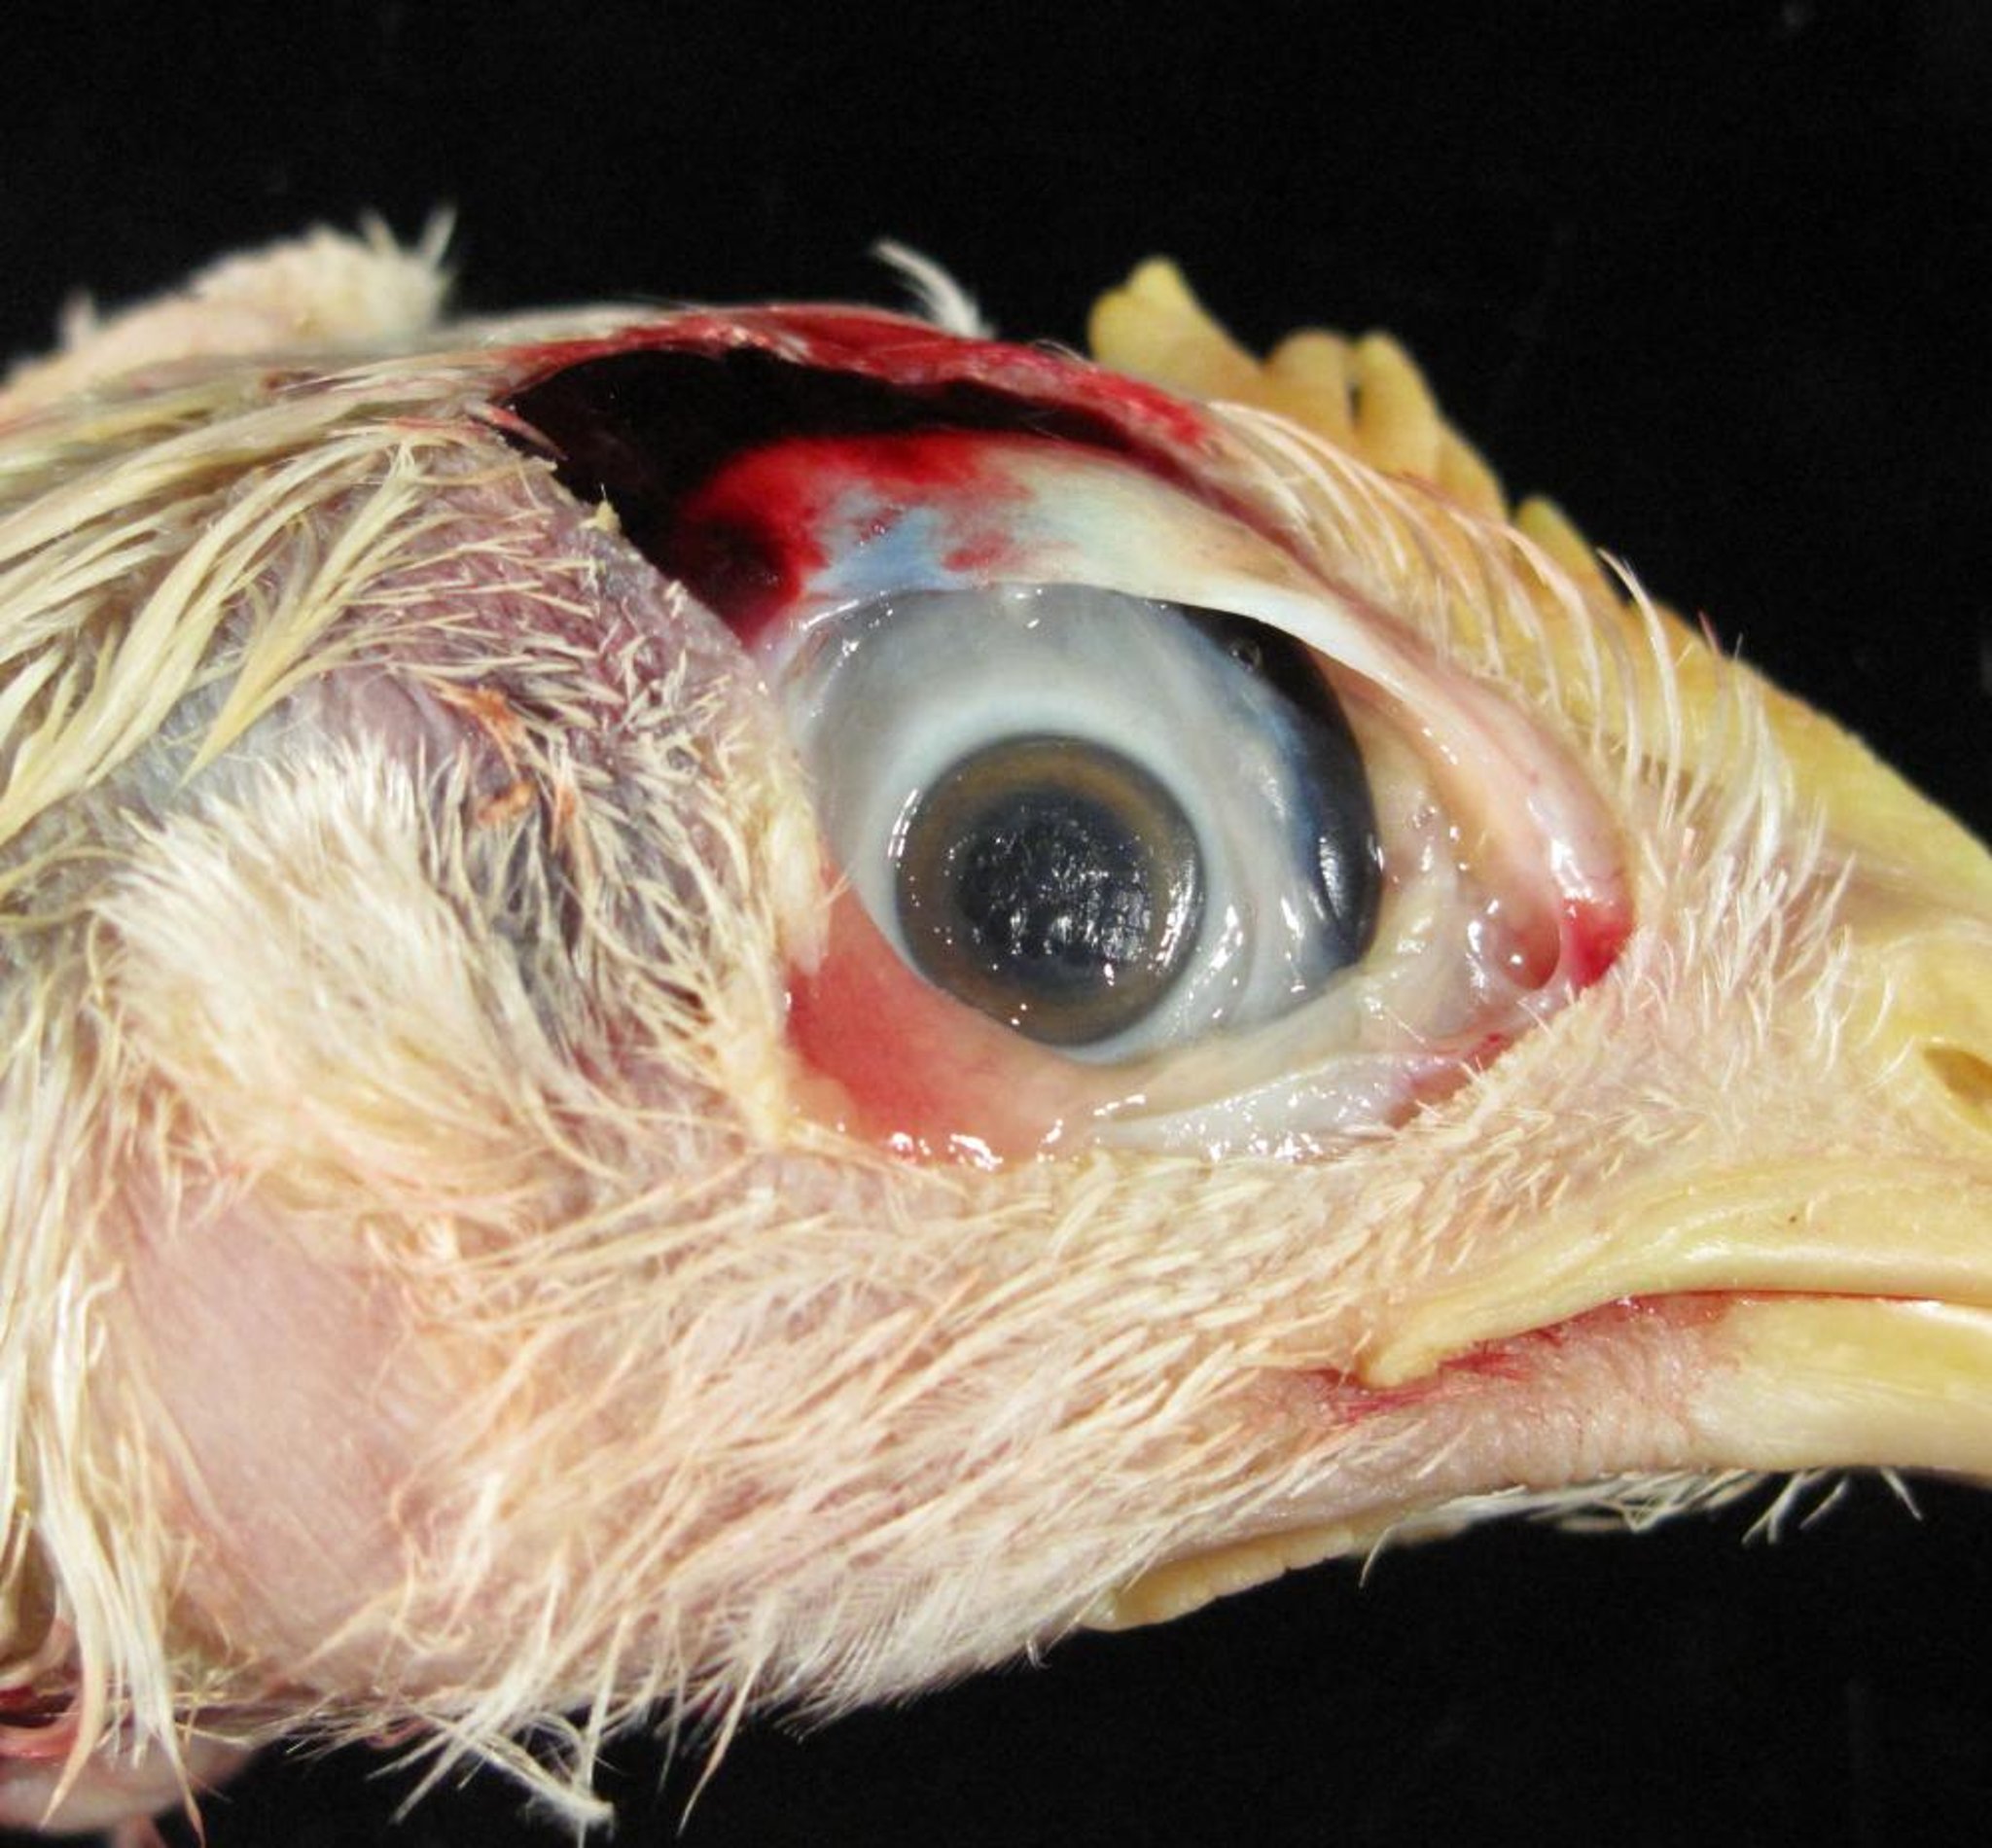 Corneal ulcers in ammonia toxicity, pullet